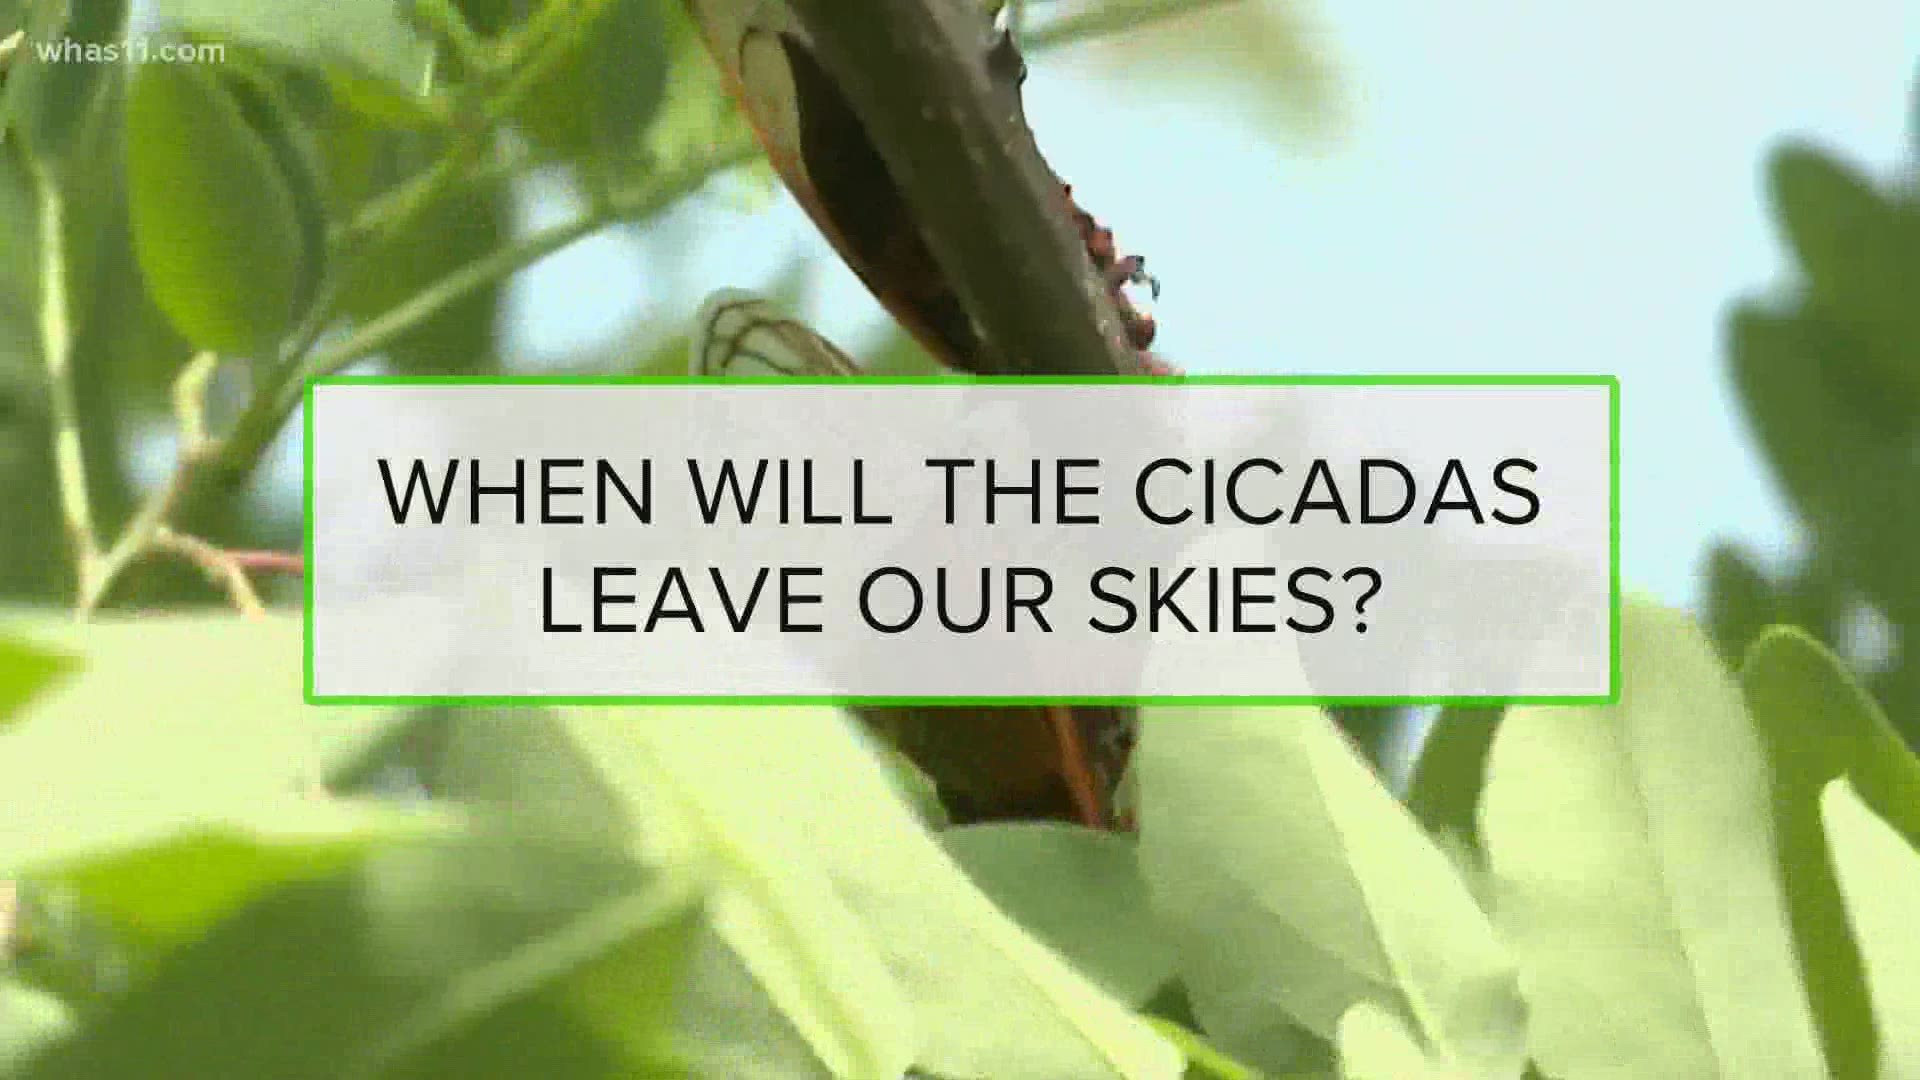 People are already counting down the days to when we no longer have to see or hear cicadas in our area.